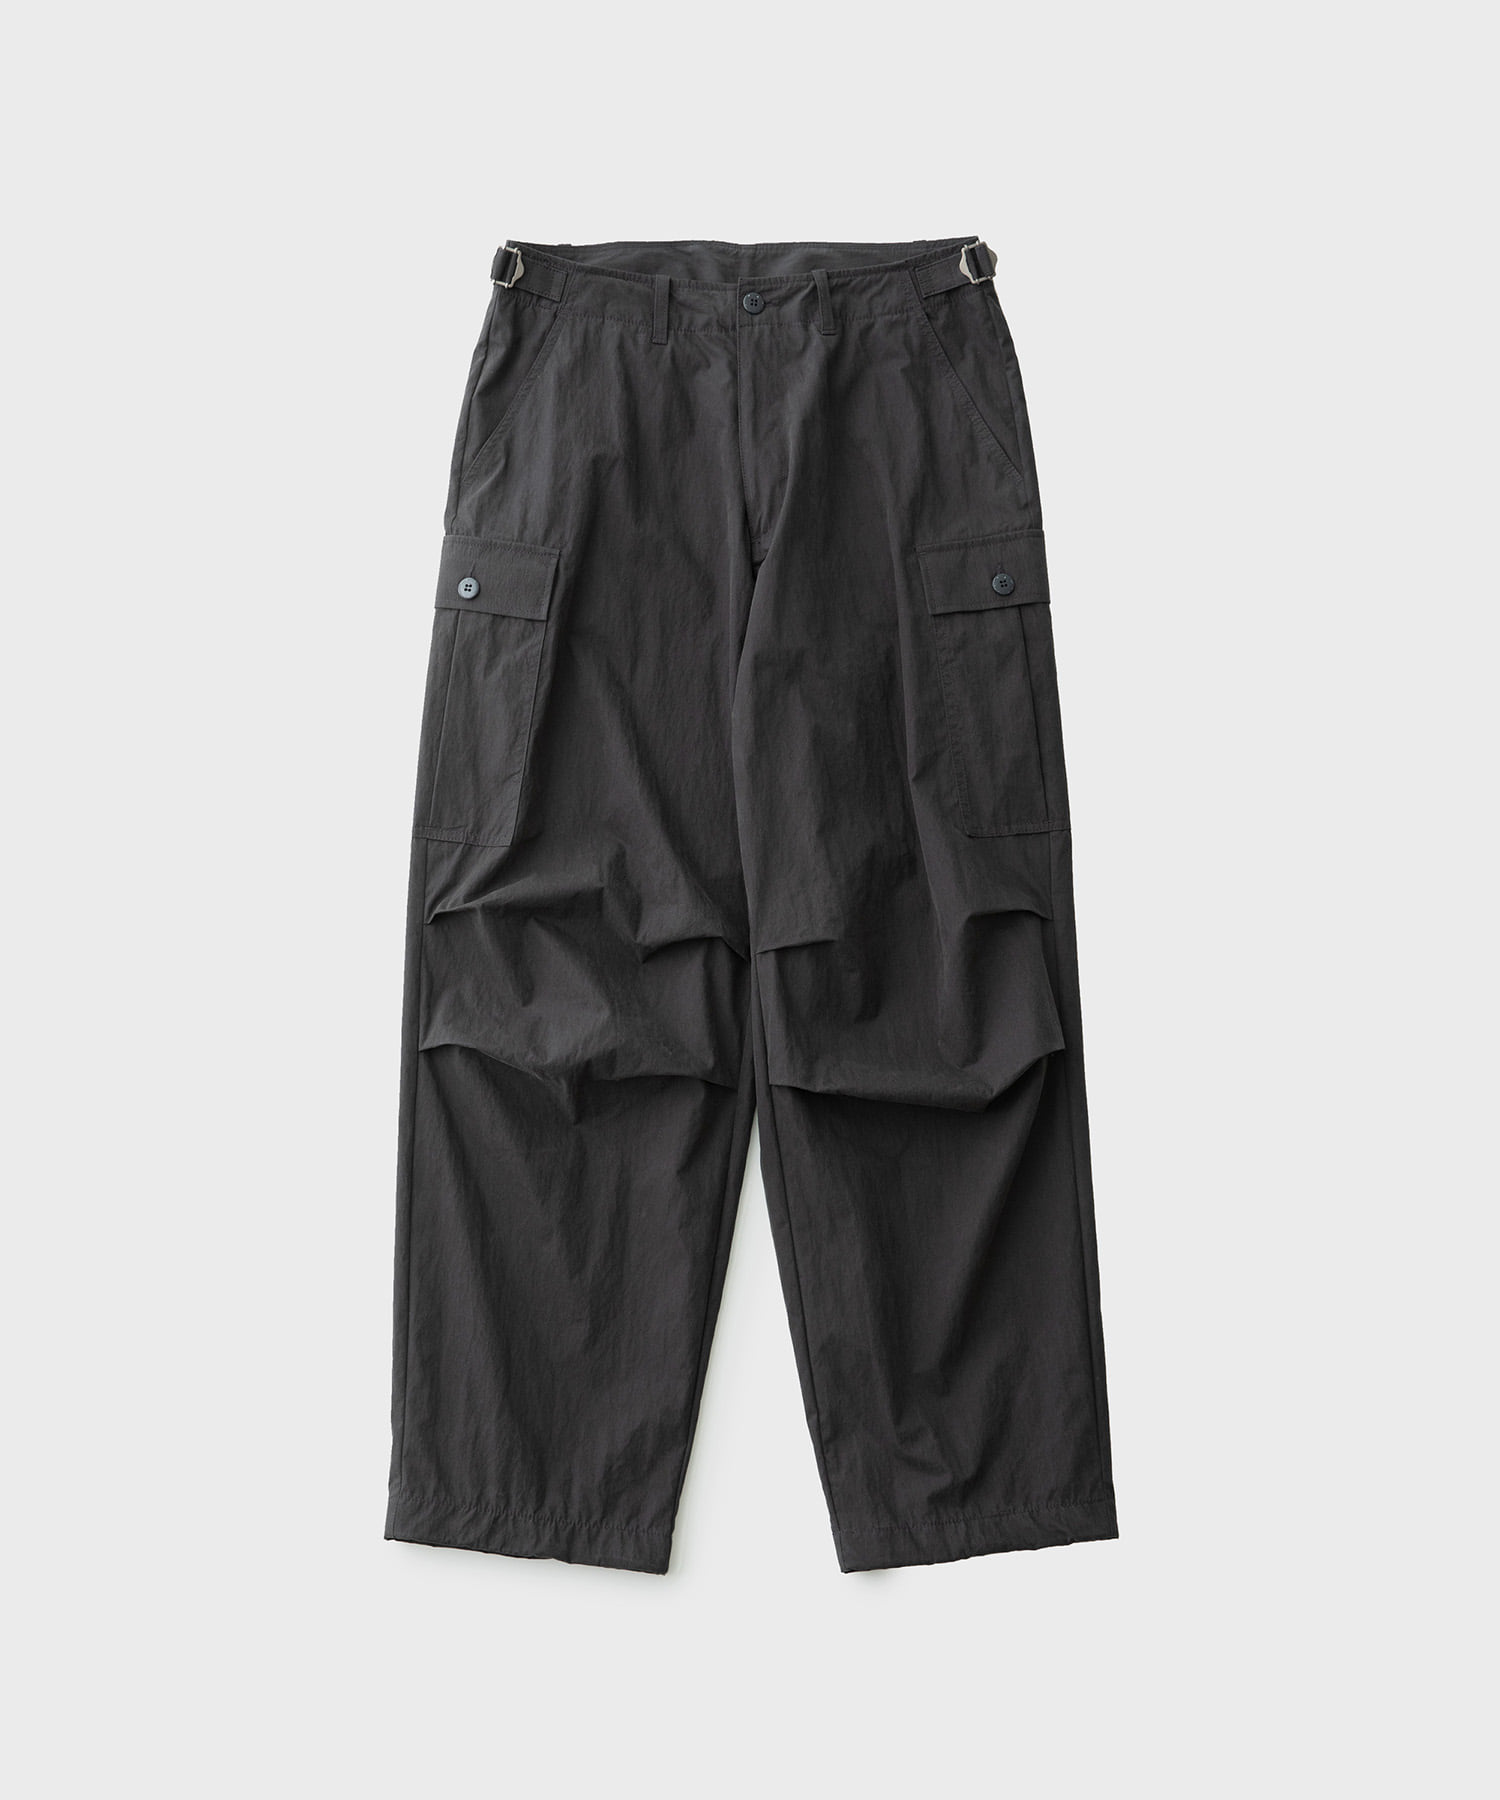 22AW M51 Field Pants (Charcoal Navy)